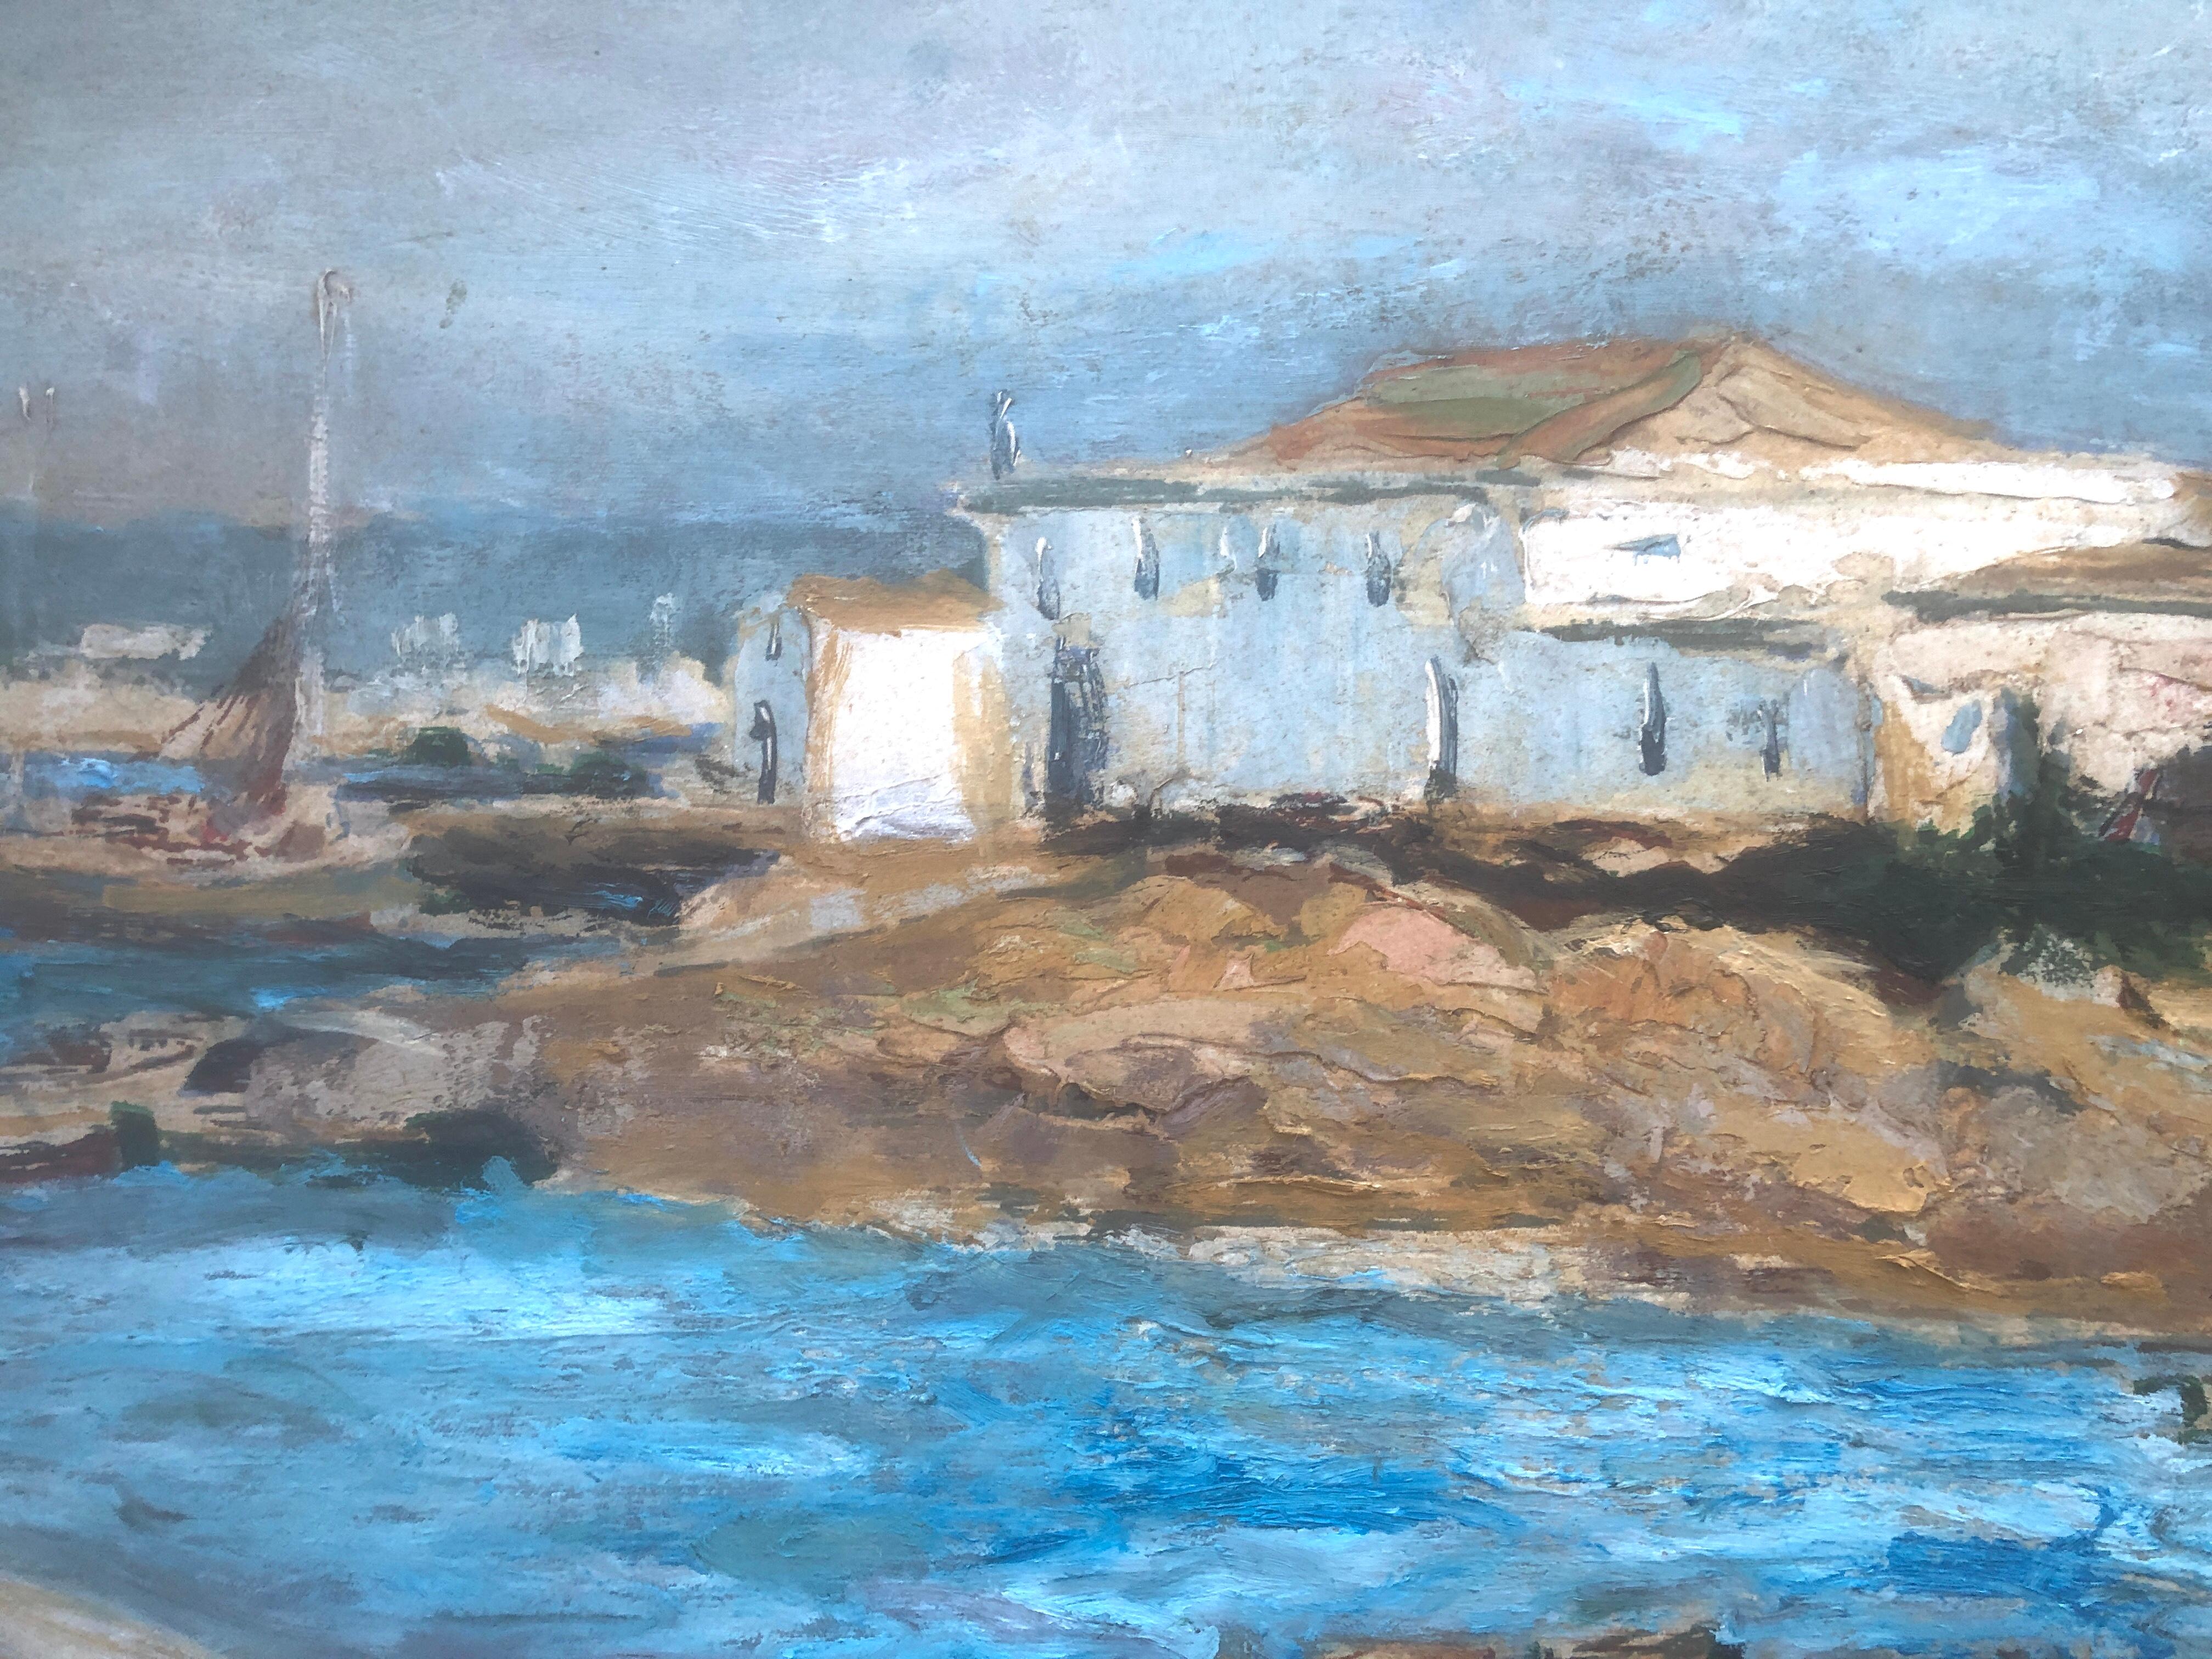 Signed Oliveras - Fisherman's Beach - Oil on canvas.
Slight paint chips on the sides that covered the frame.
Oil measurements 61x122 cm.
Frameless.